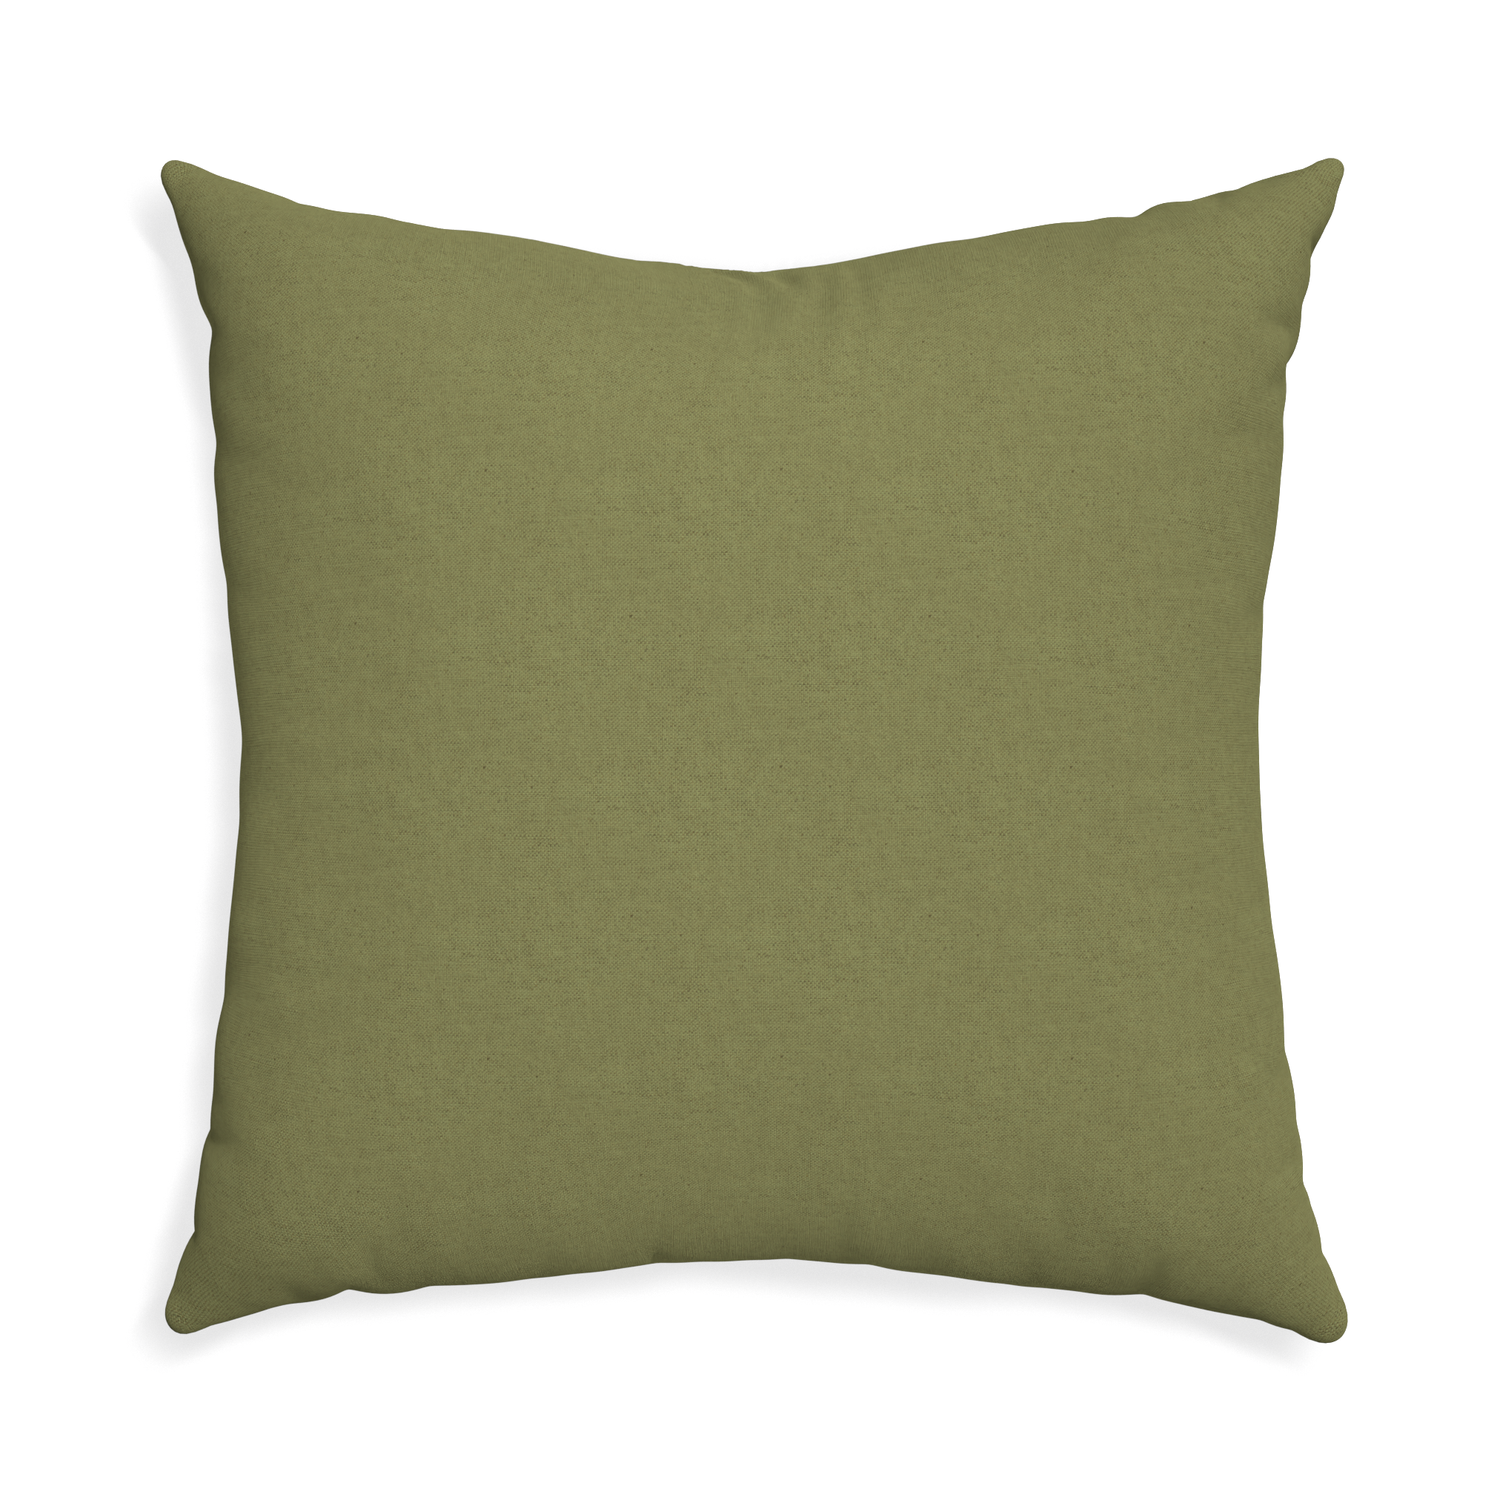 Euro-sham moss custom moss greenpillow with none on white background